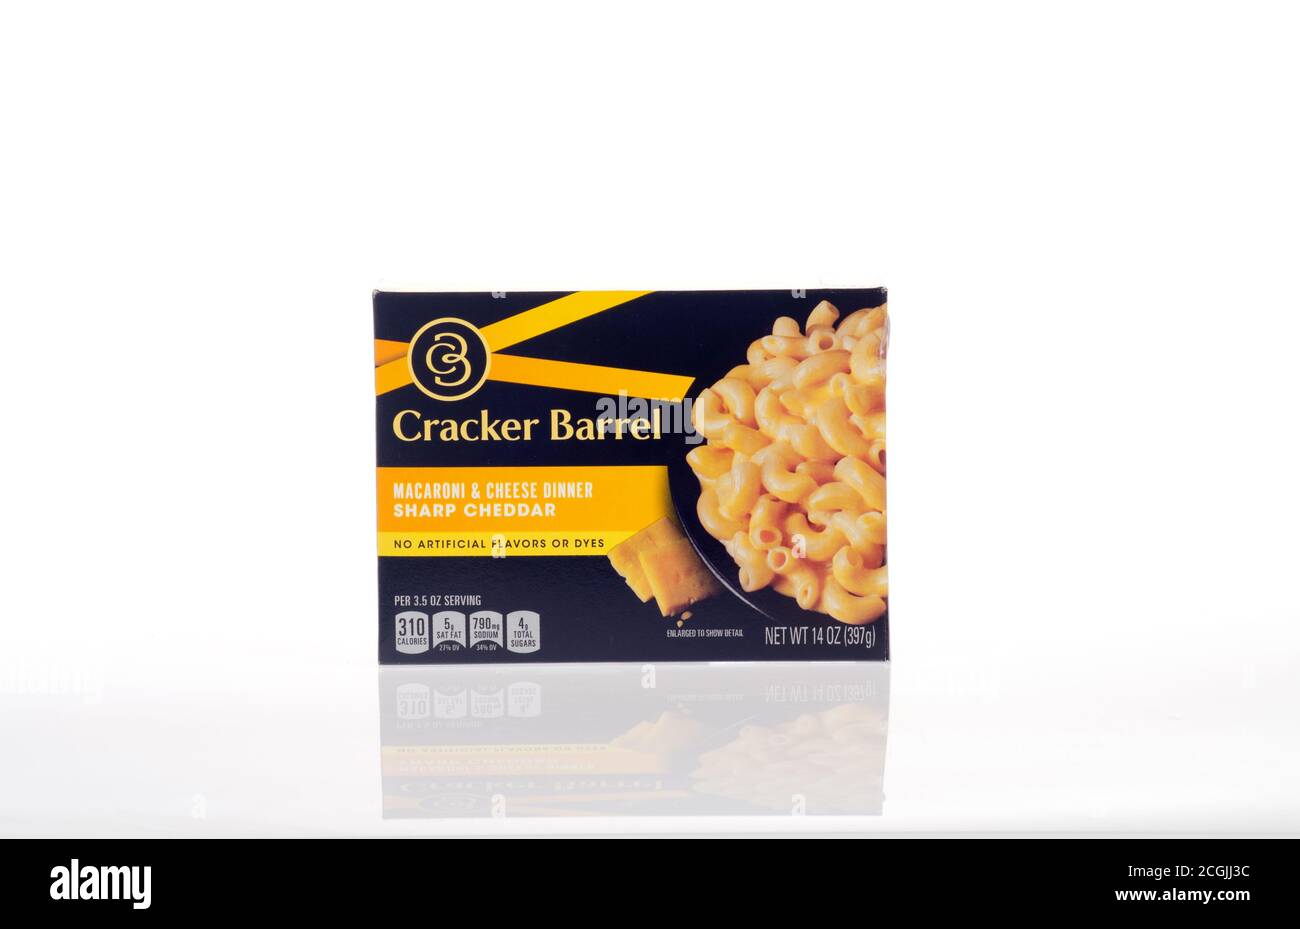 Box of Cracker Barrel Macaroni & Cheese Dinner sharp cheddar with no artificial flavors or dyes on white by Kraft Stock Photo